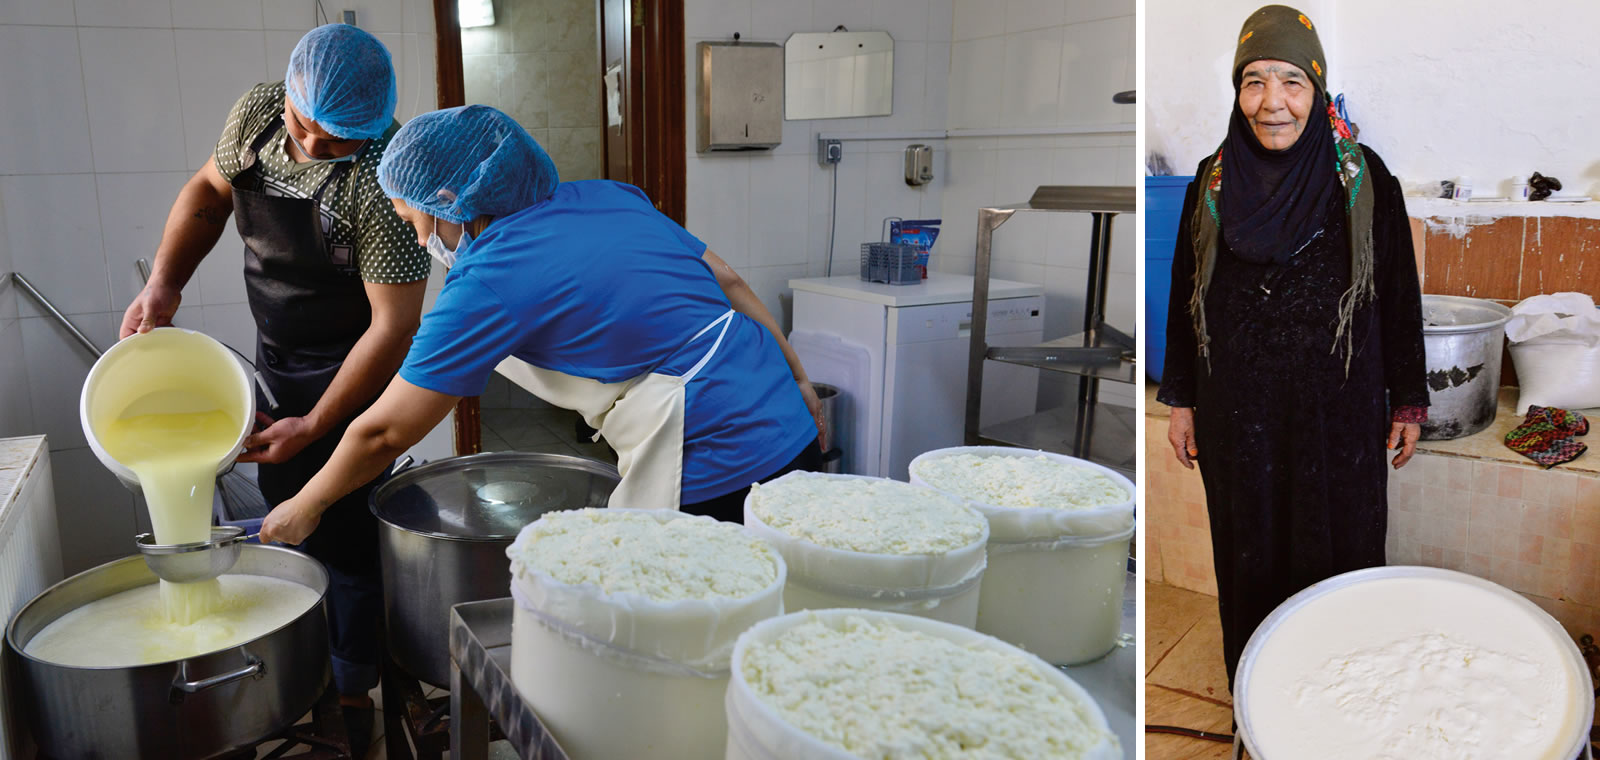 Left: Nisreen’s employees strain quraish, a curded cheese similar to ricotta. Right: In Madaba, outside of Amman, a Bedouin woman shows a similar process of making jameed cheese.